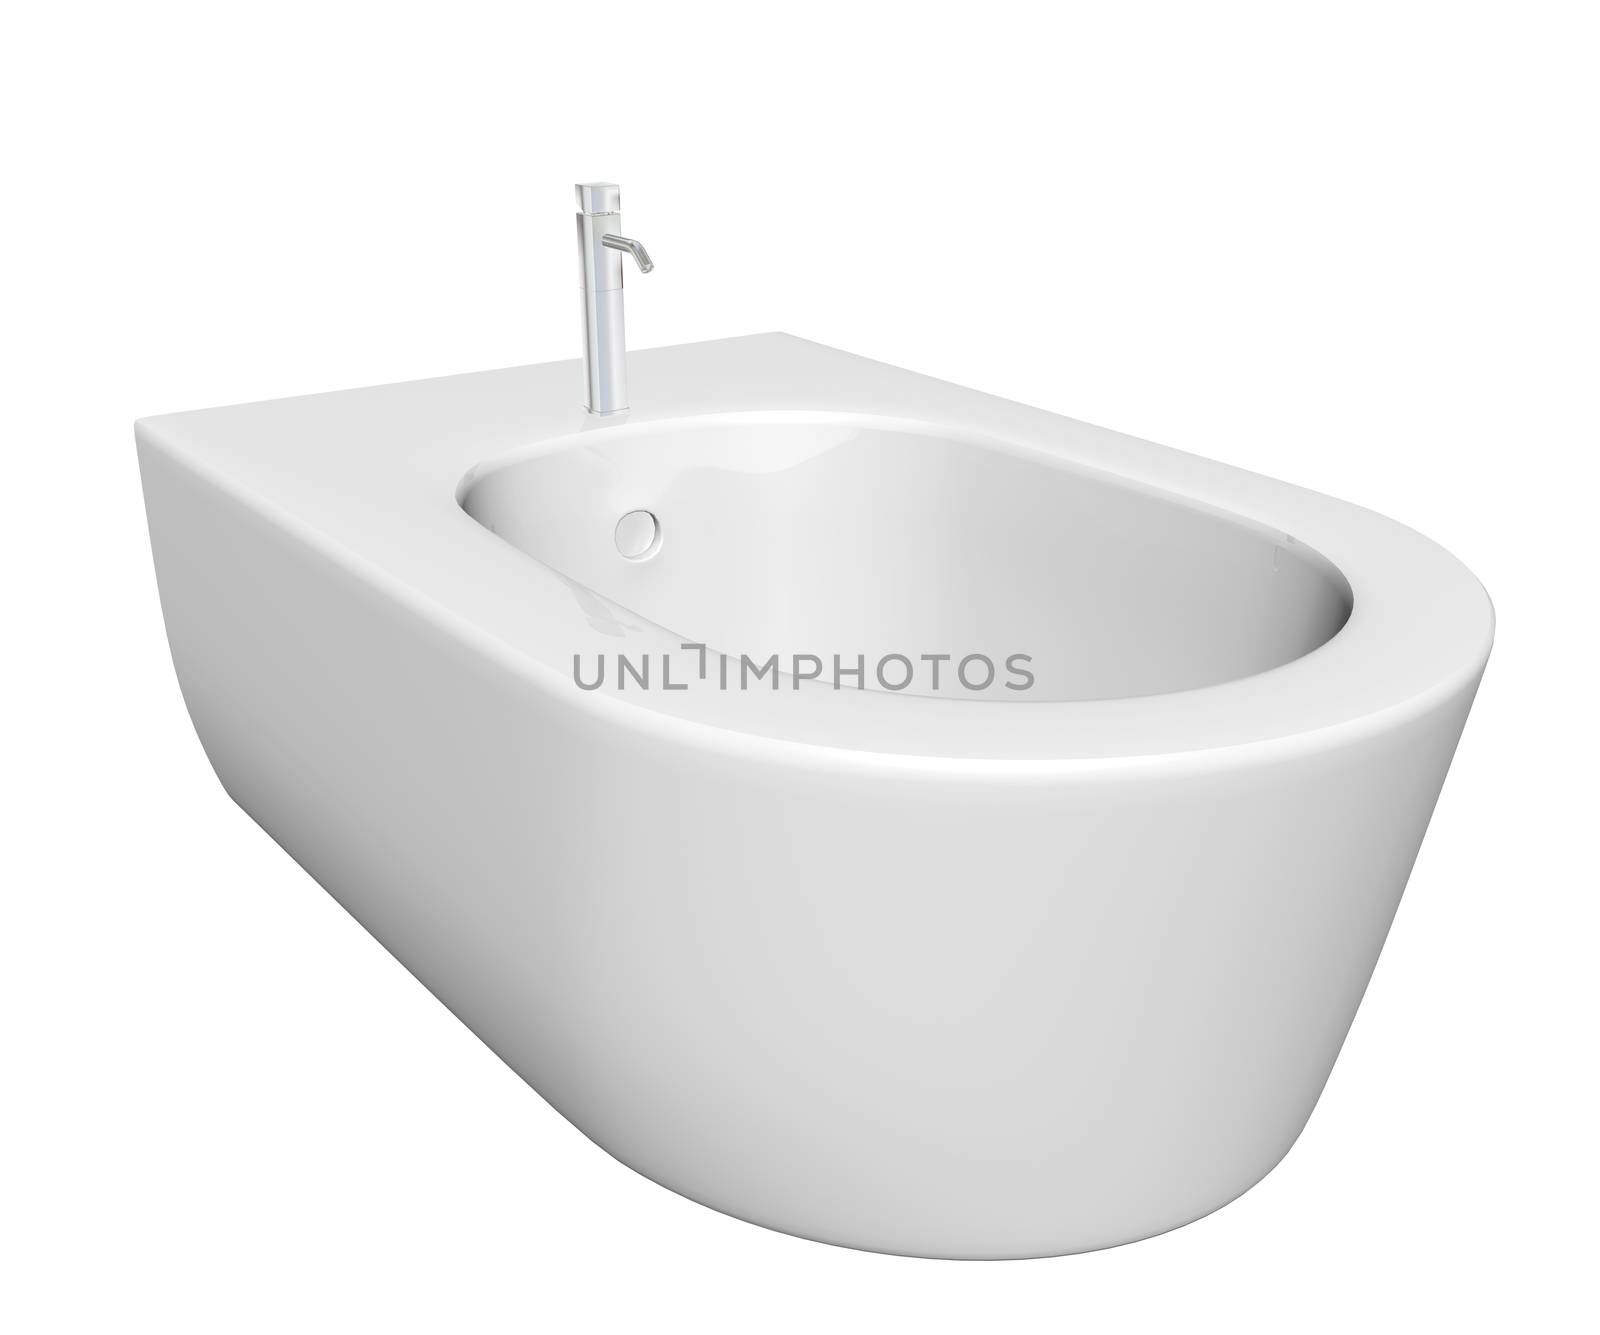 Round bidet design for bathrooms. Type of sink intended for washing the genitalia, inner buttocks, and anus. 3D illustration, isolated against a white background.